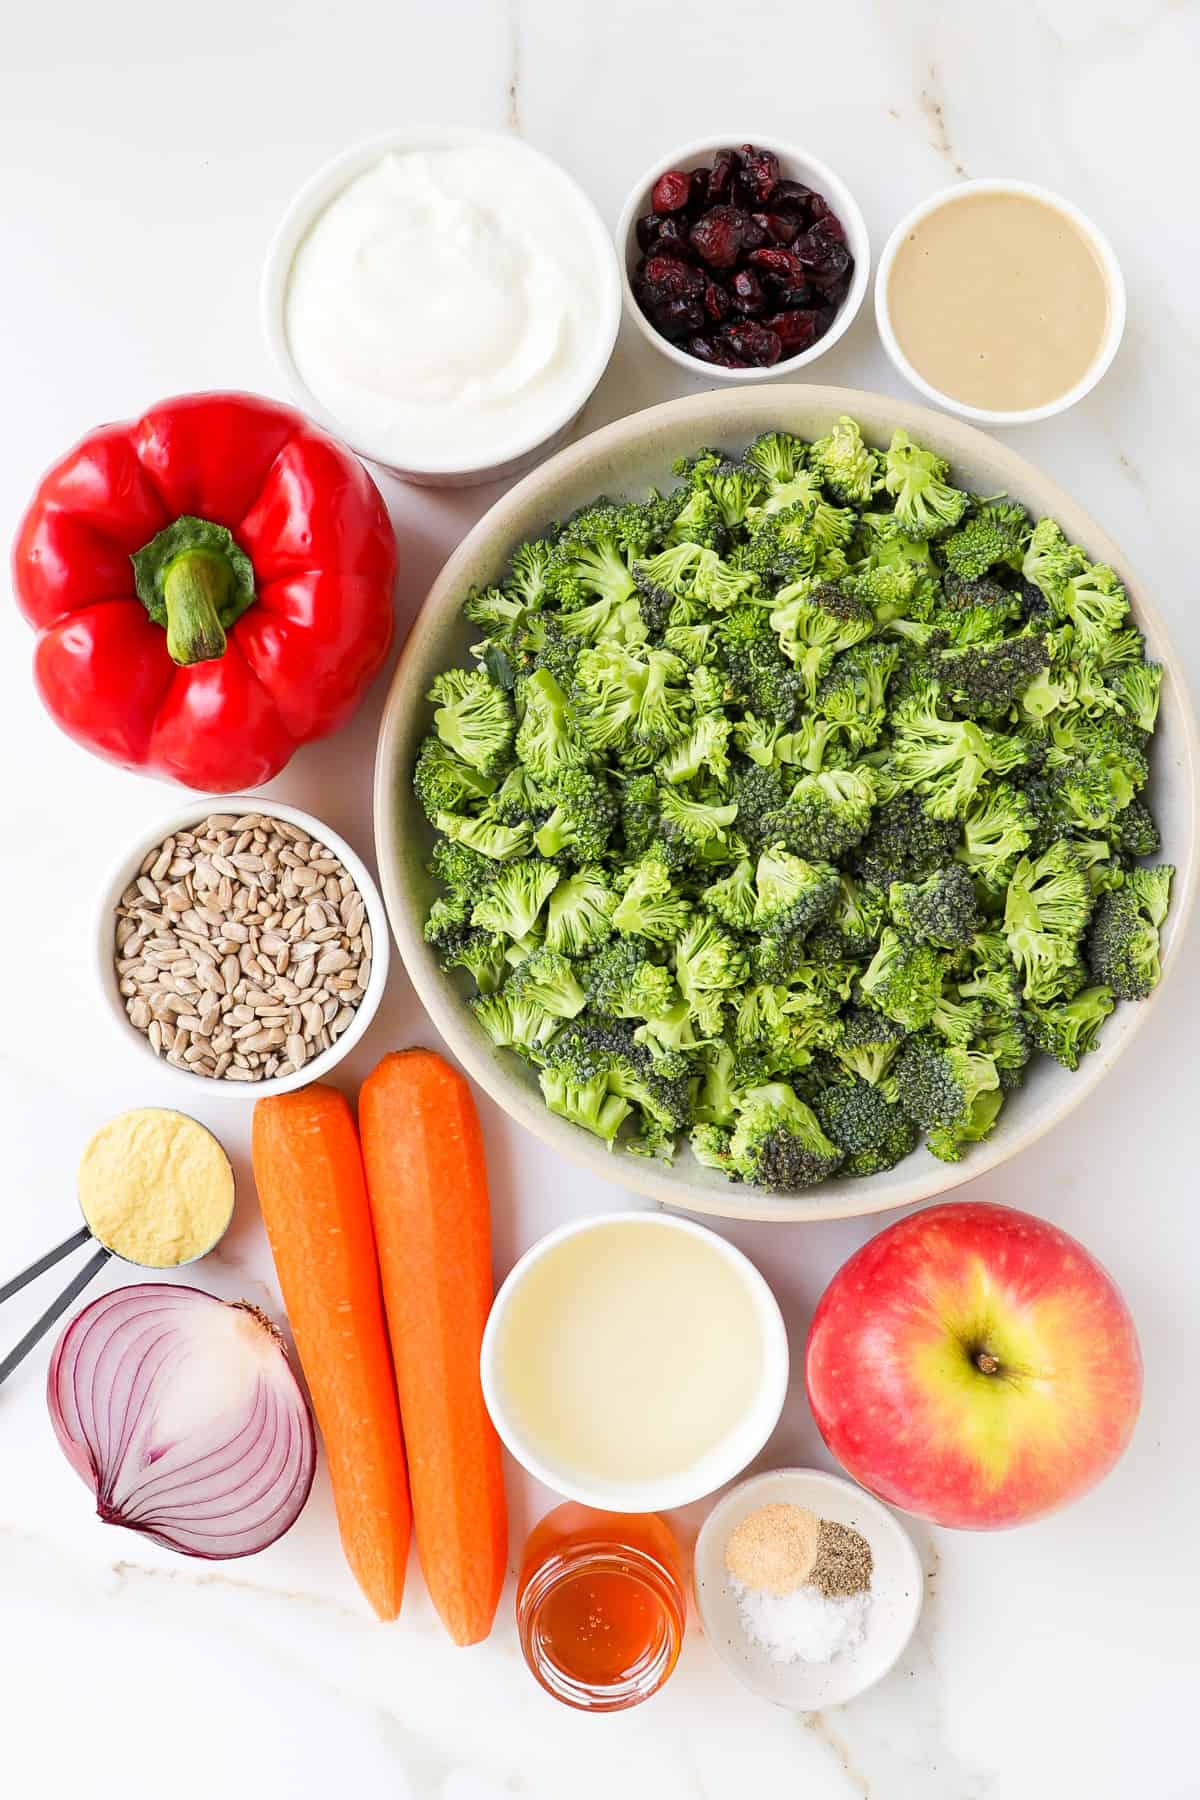 Ingredients shown to make the broccoli crunch salad.